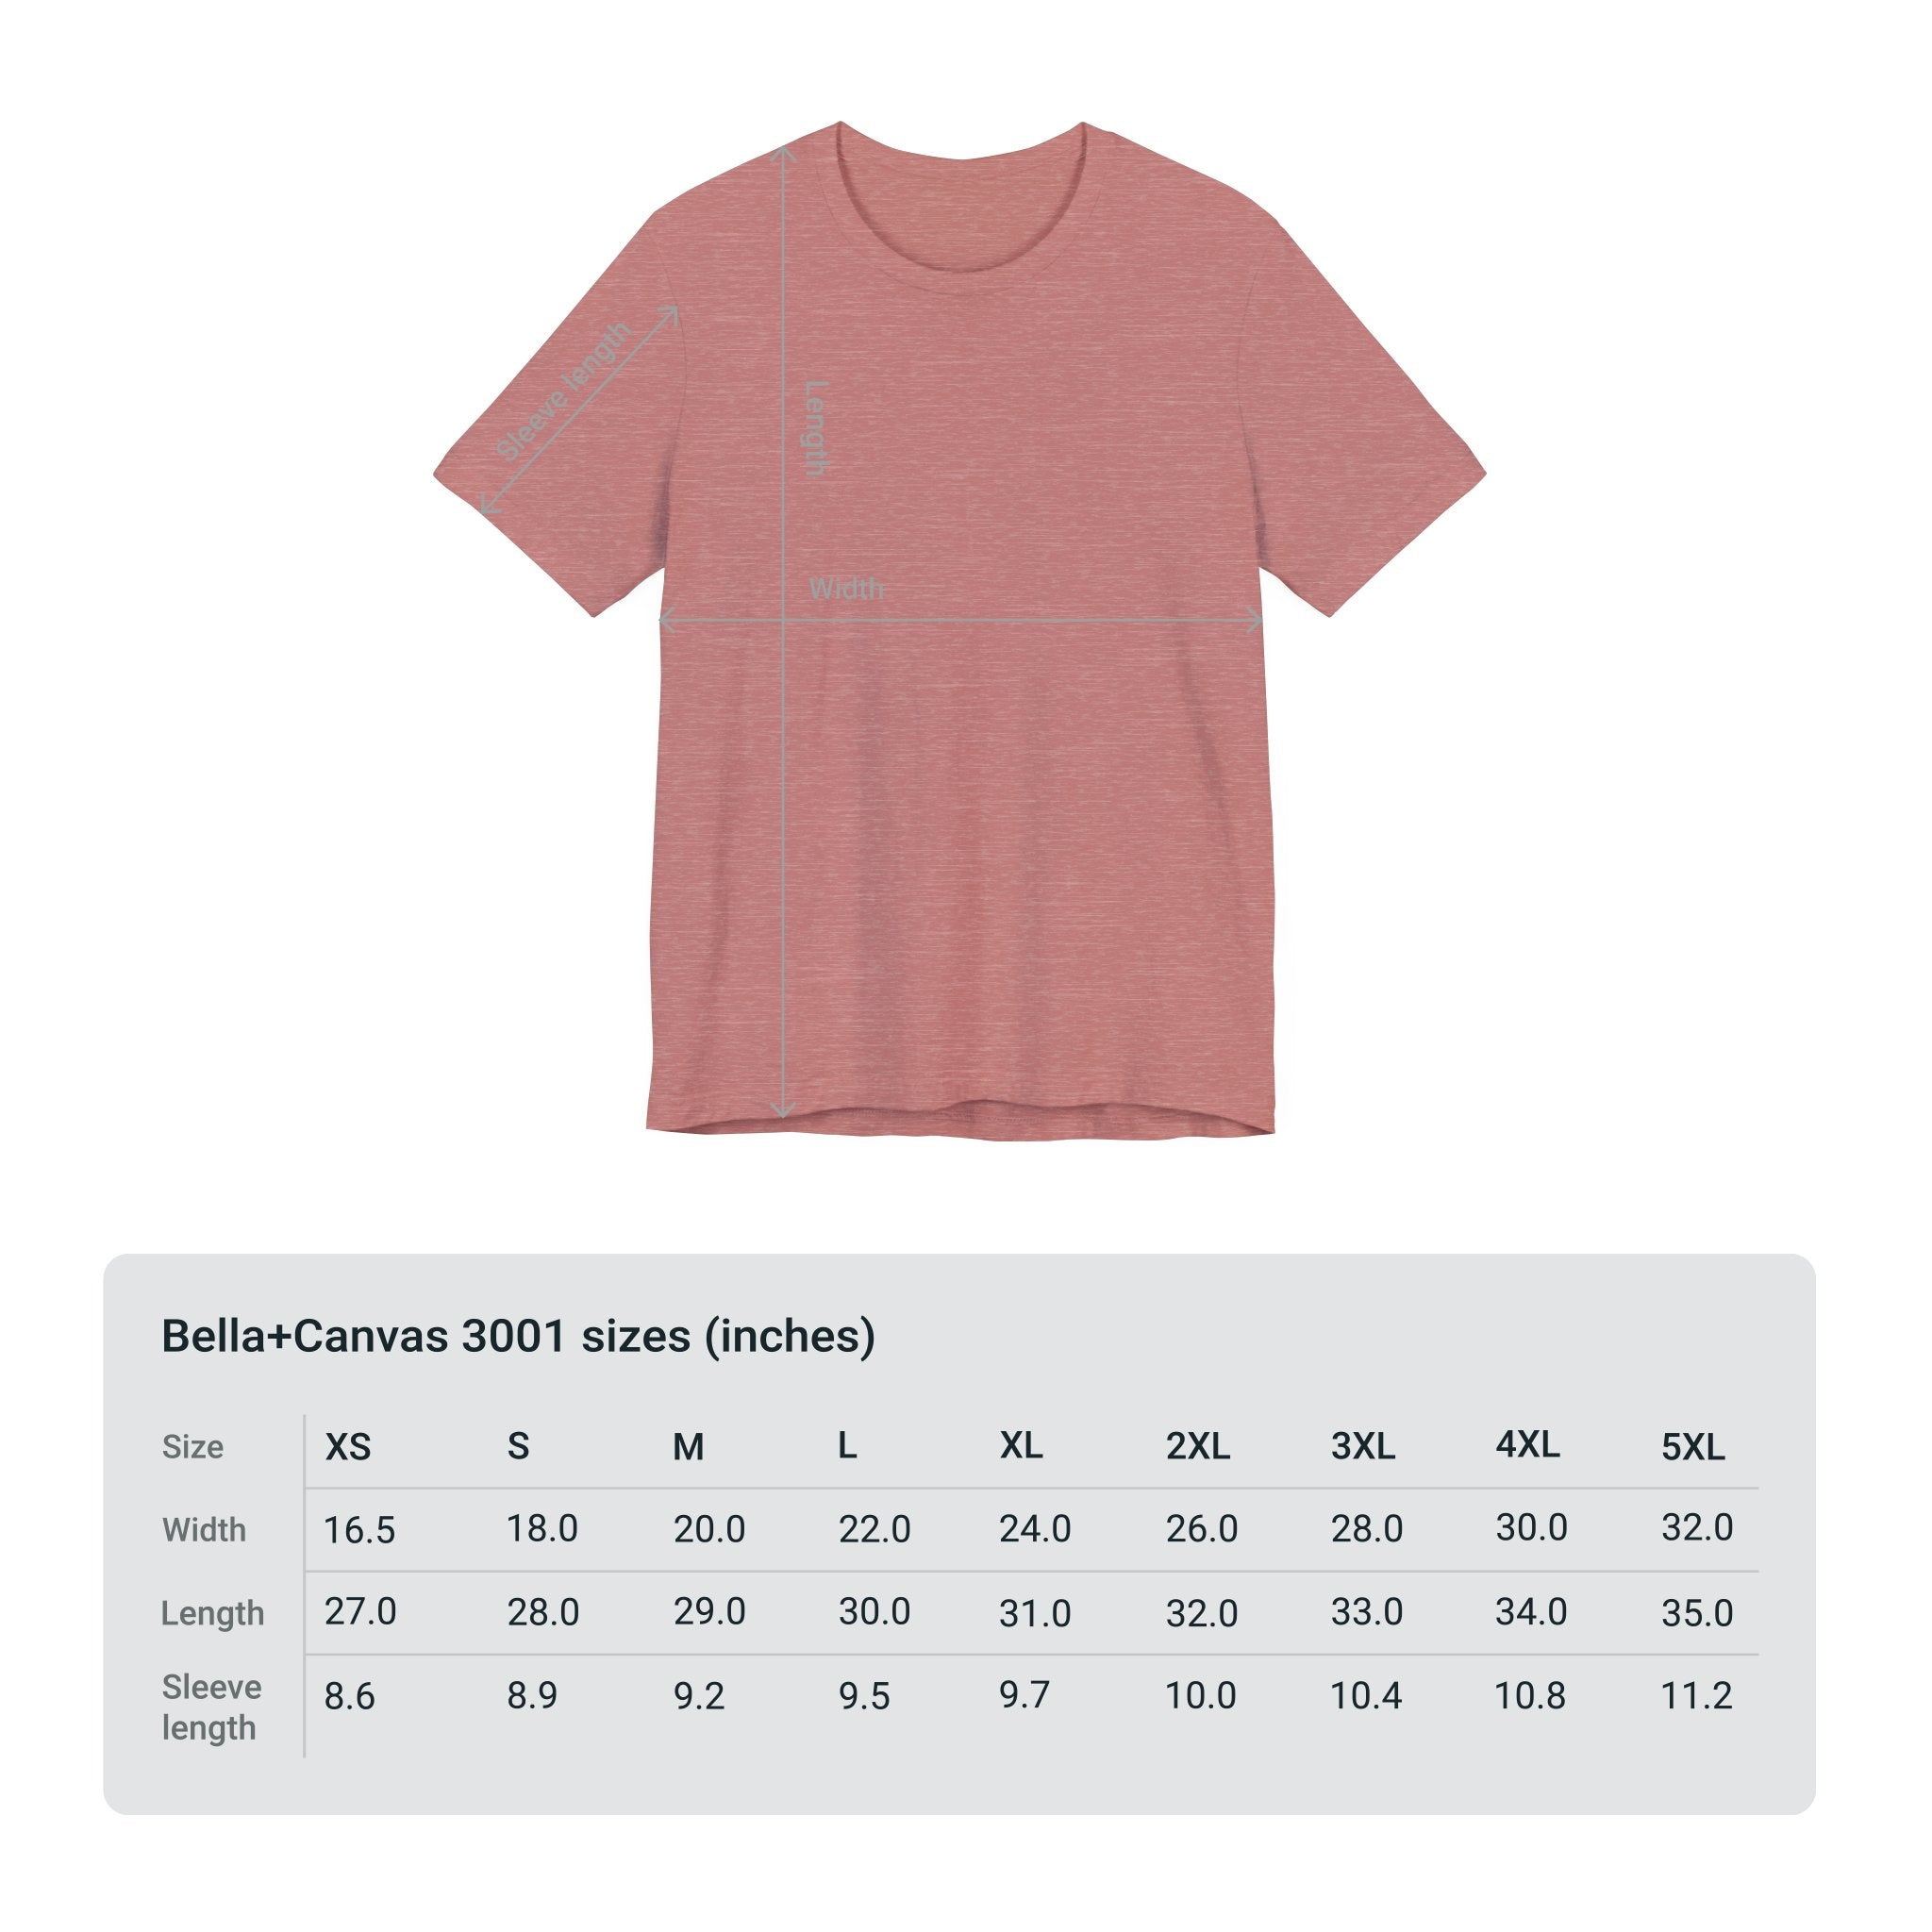 Women’s Adventure Unlimited Surfing T-Shirt with Size Guide - Direct-to-Garment Printed Item